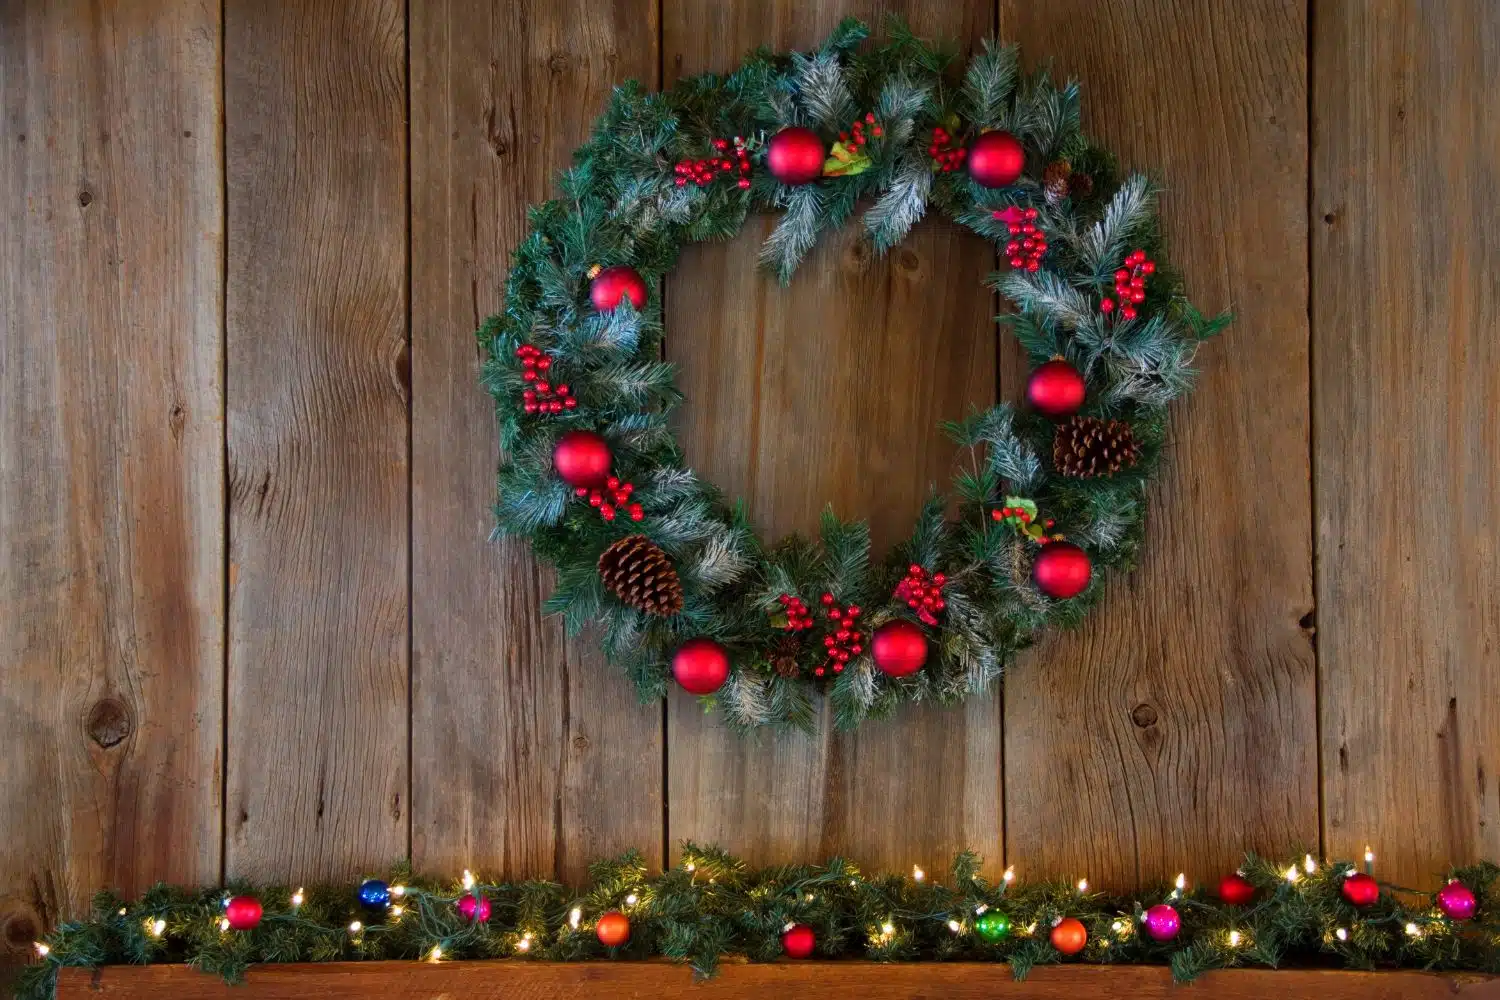 How to Create Simple Christmas Wreaths and Garlands